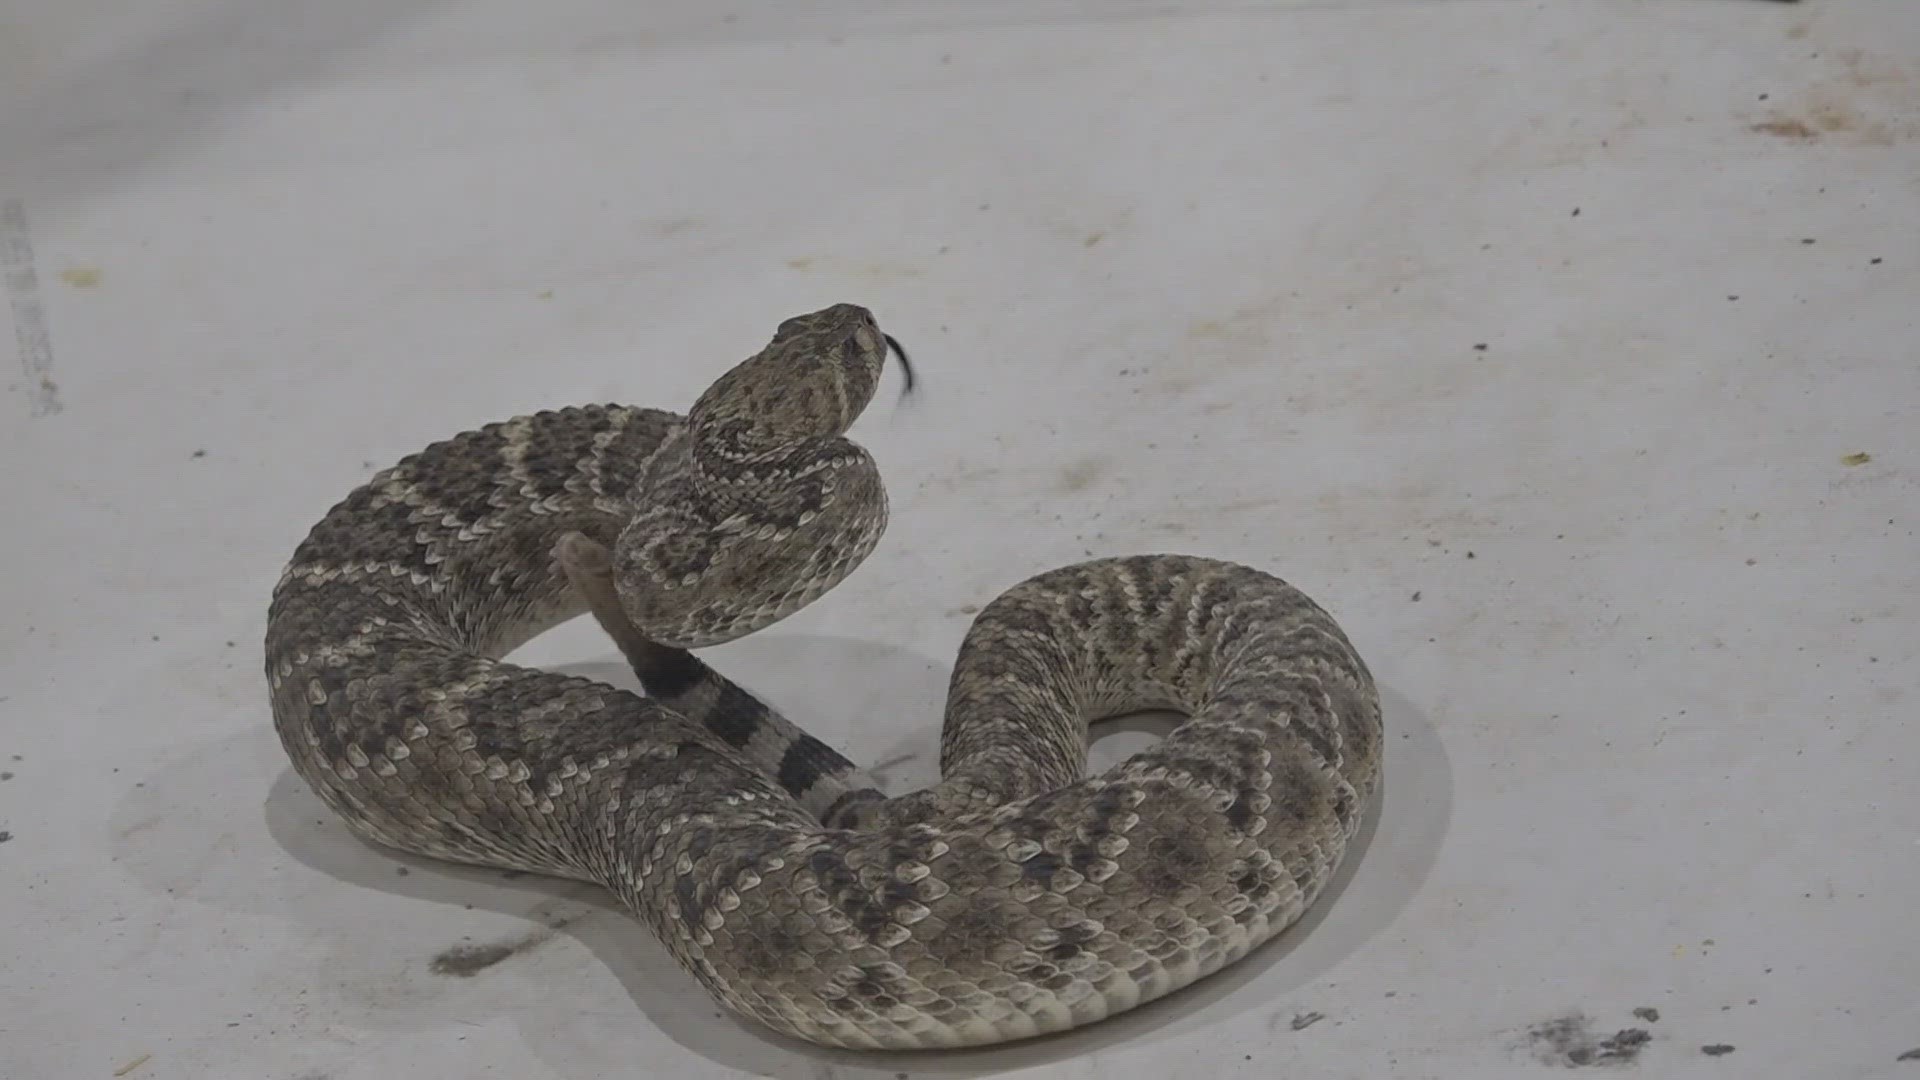 Thousands of pounds worth of rattlesnakes will be dropped off during the event.